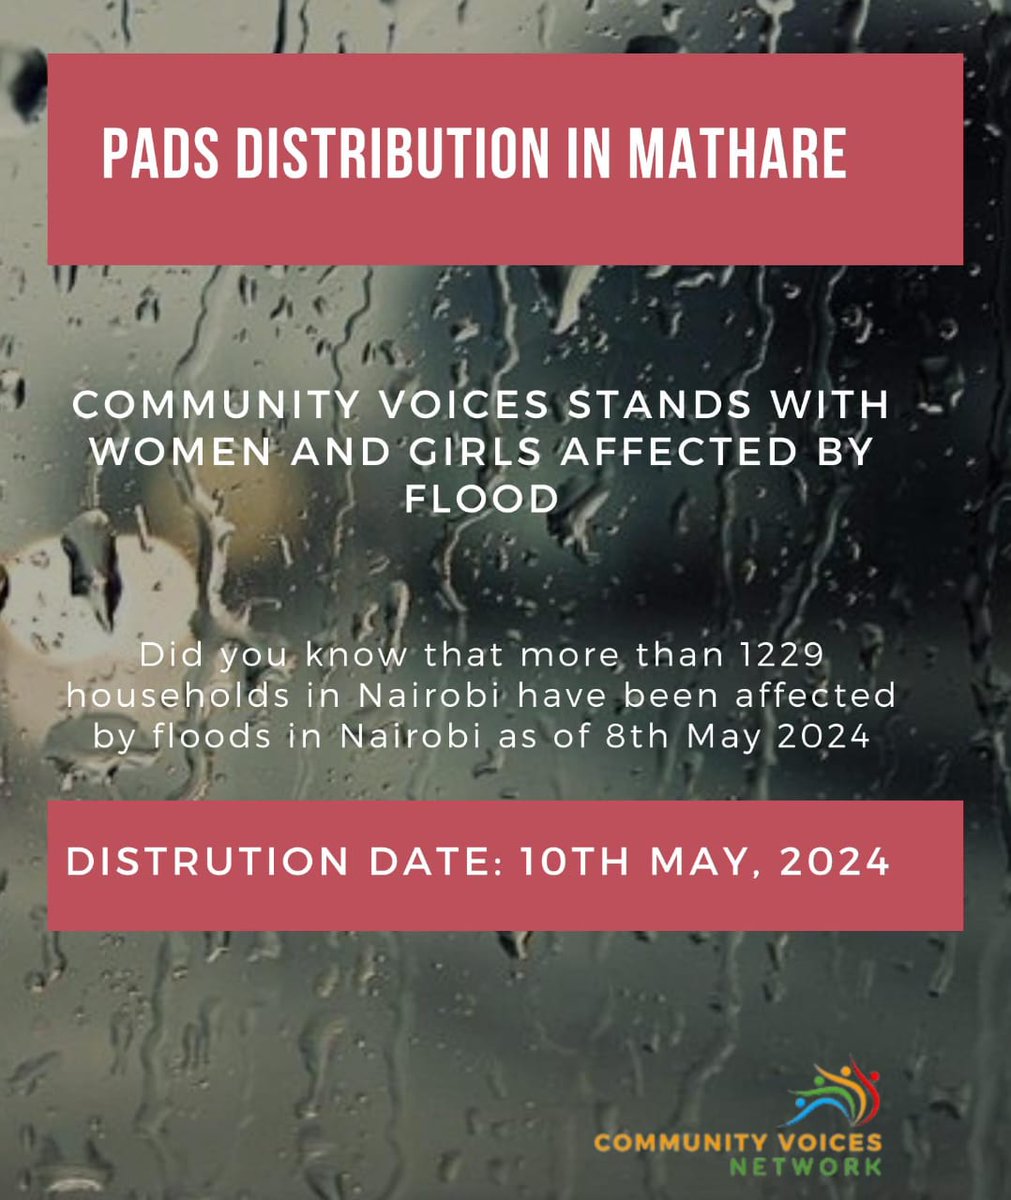 Floods impact menstrual health; it disrupts access to clean water, sanitation facilities, and hygiene products. In line with the #MenstrualHygieneDay happening this month, #CommunityVoices stands with women and girls from Mathare by distributing dignity packs.
@SunworldSafaris